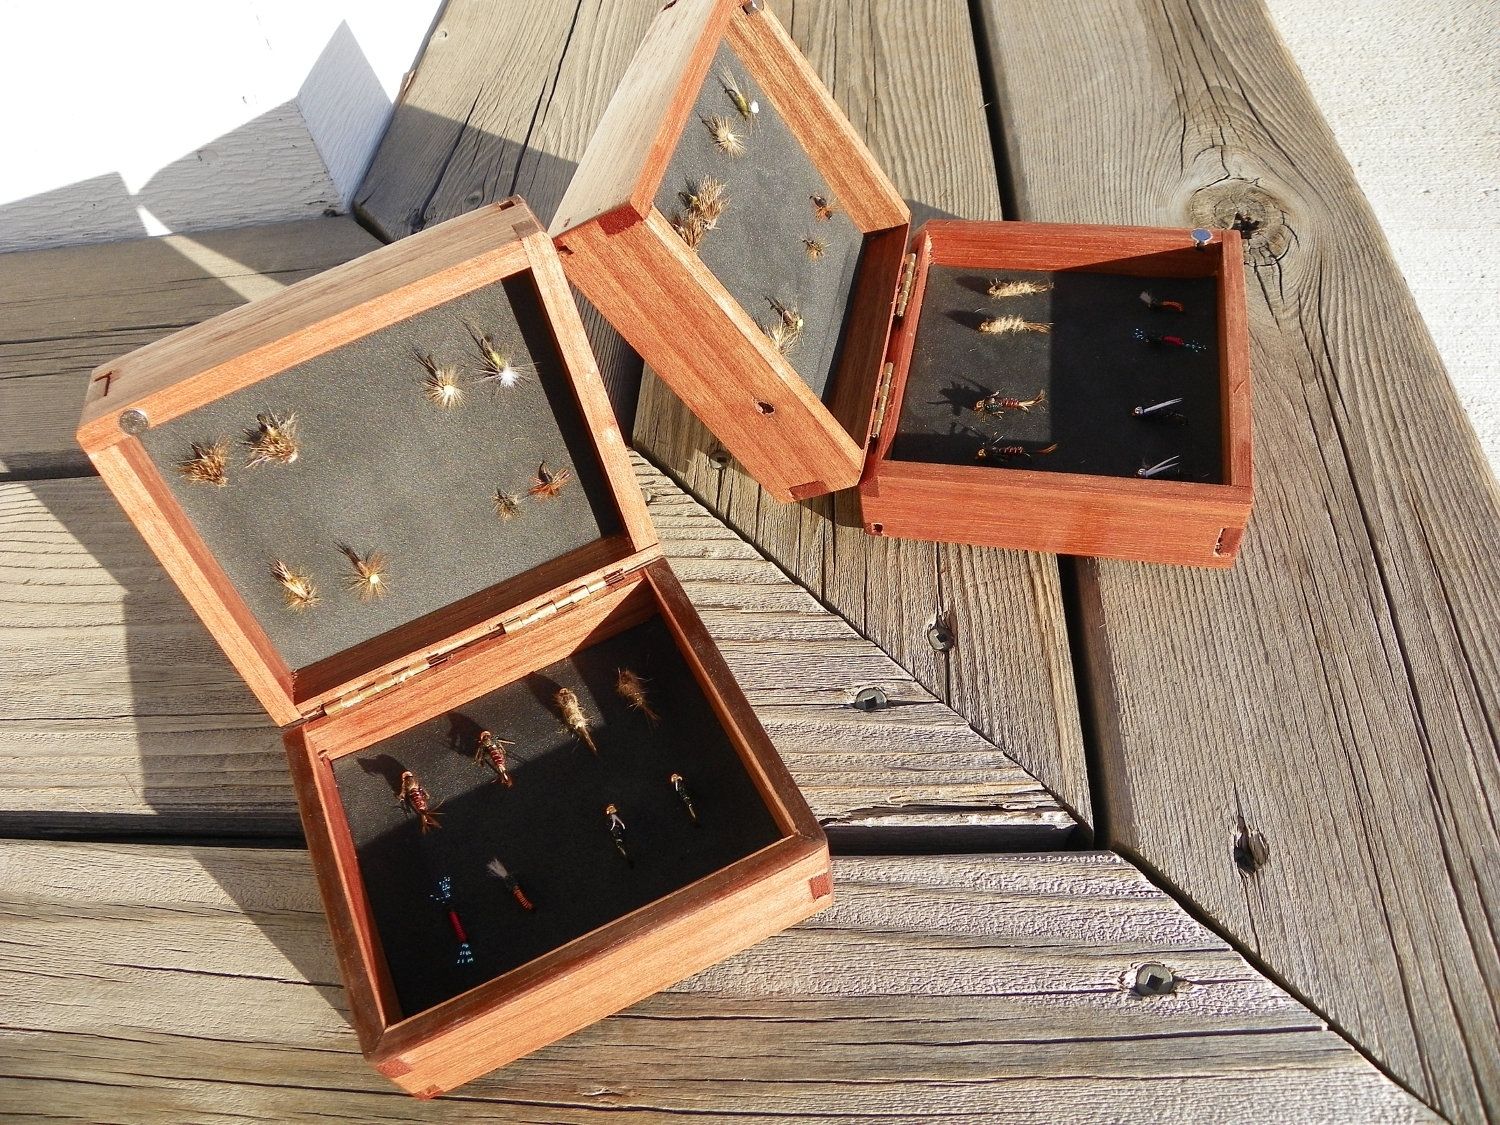 Hand Crafted Fly Fishing Boxes With Fly Selection Made From